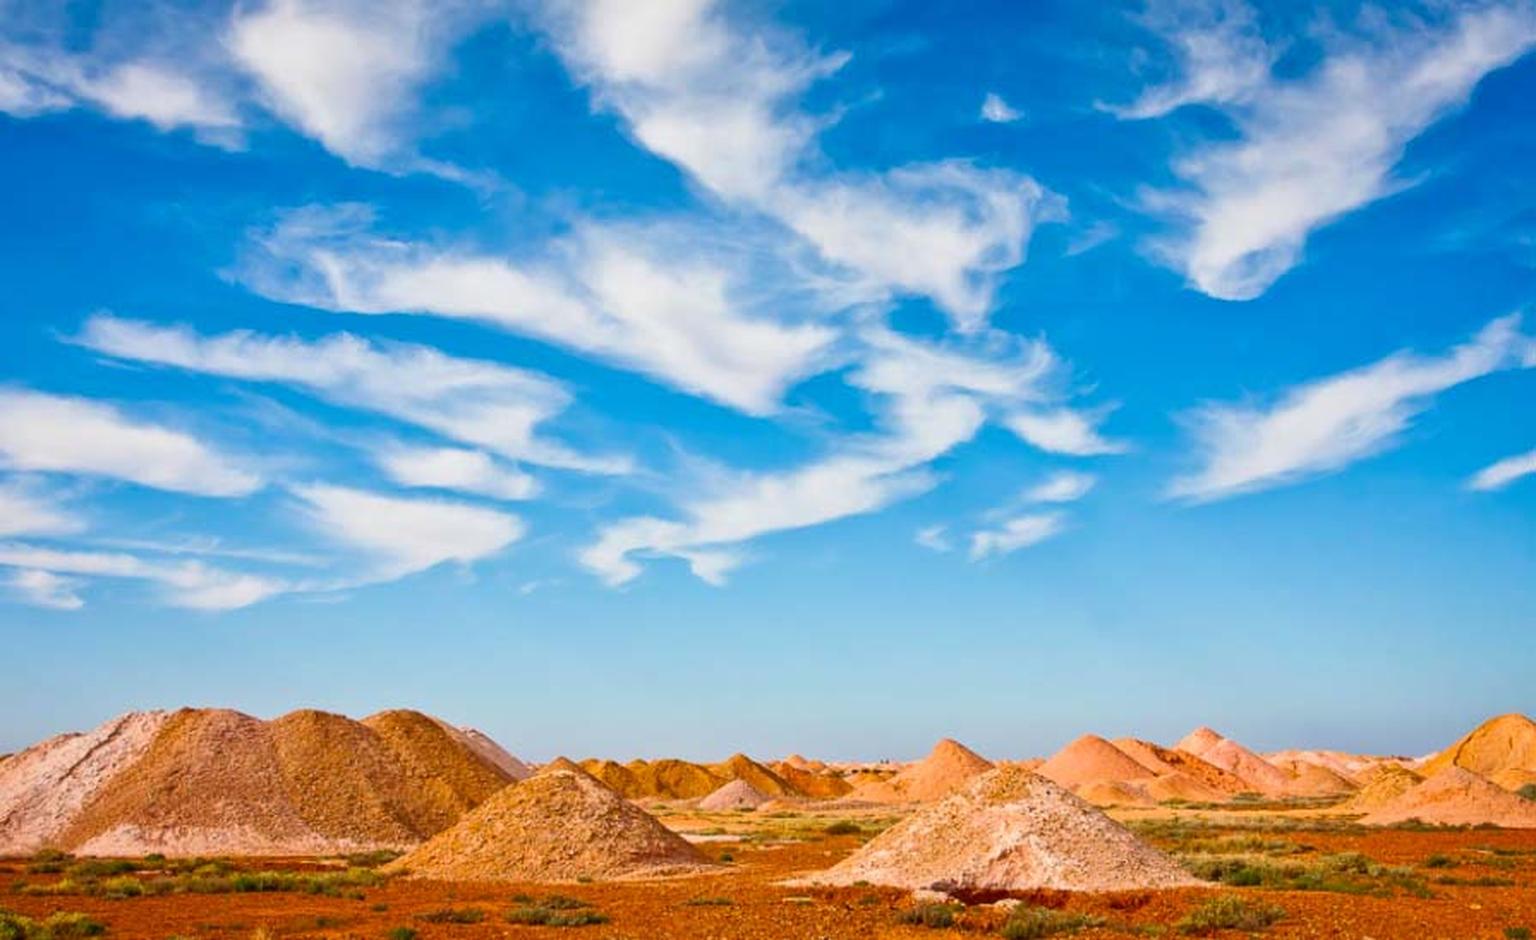 Mullock Heaps, the leftover residual dirt from the opal mining process, which may contain small pieces of opal fragments that were missed by the miners, is a popular spot for locals and tourists. Photo: Courtesy of South Cape Photography / District Counci